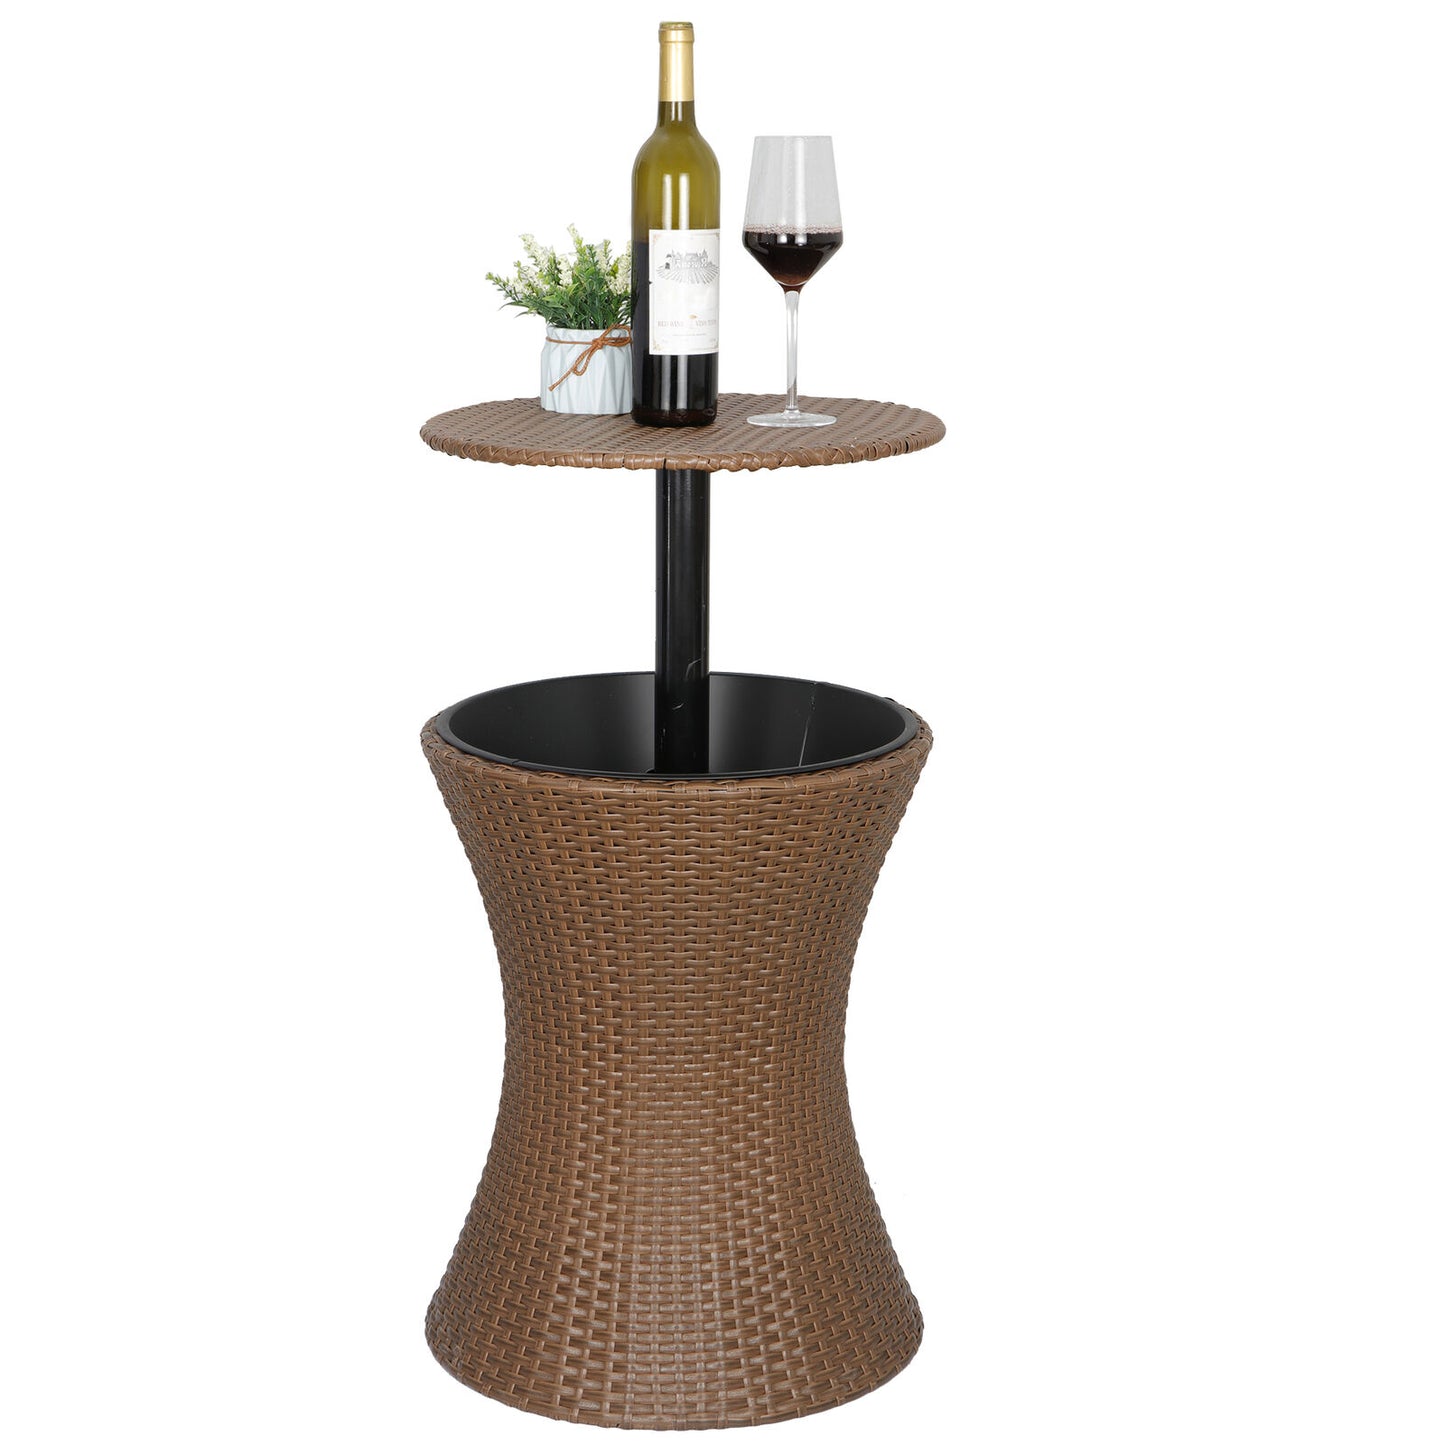 Adjustable Rattan Ice Cooler Drink Cooler Party Cool Bar Table Pool Wine Garden